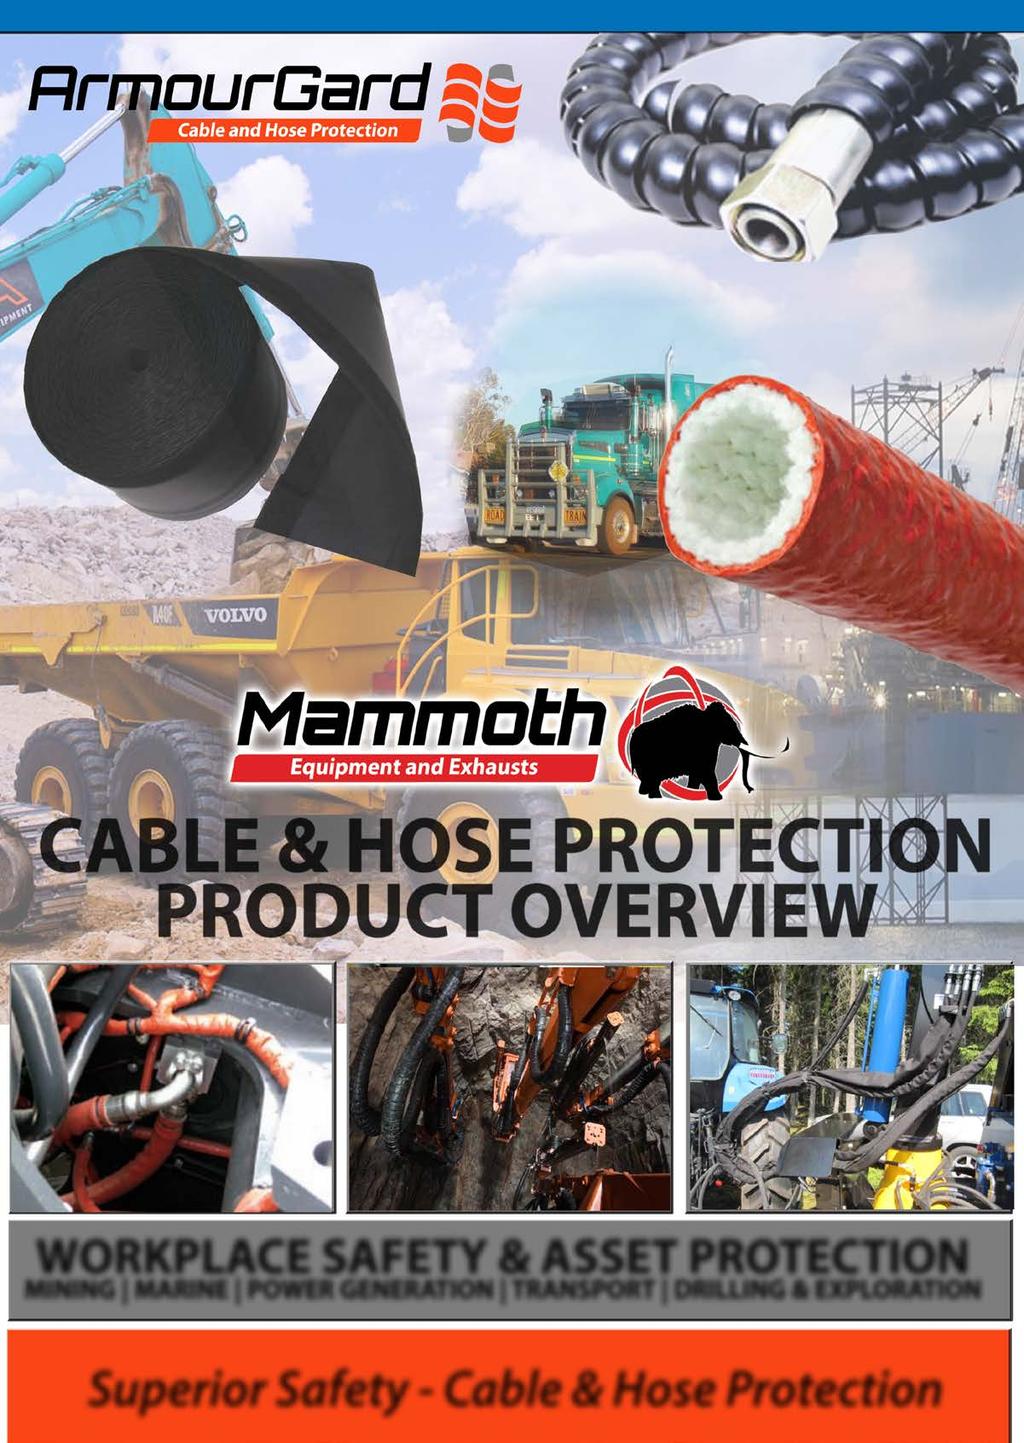 CABLE & HOSE PROTECTION PRODUCT OVERVIEW WORKPLACE SAFETY & ASSET PROTECTION MINING MARINE